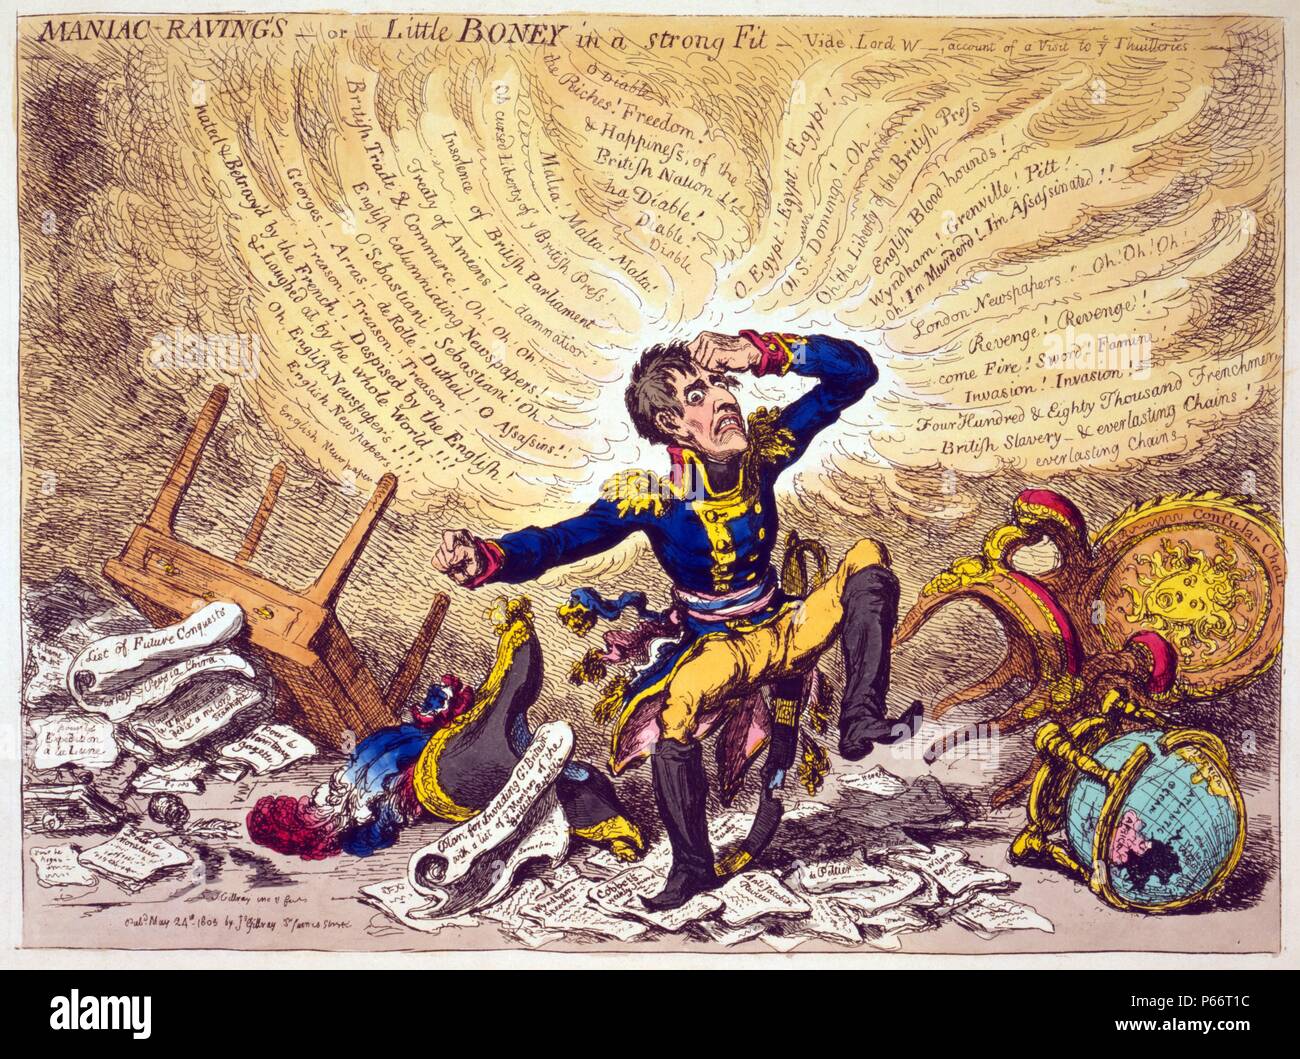 Maniac-raving's-or-Little Bony in a strong fit Cartoon by James Gillray, 1756-1815, engraver 1803. Cartoon showing Napoleon in a fury over relations between France and England. 1803 Stock Photo